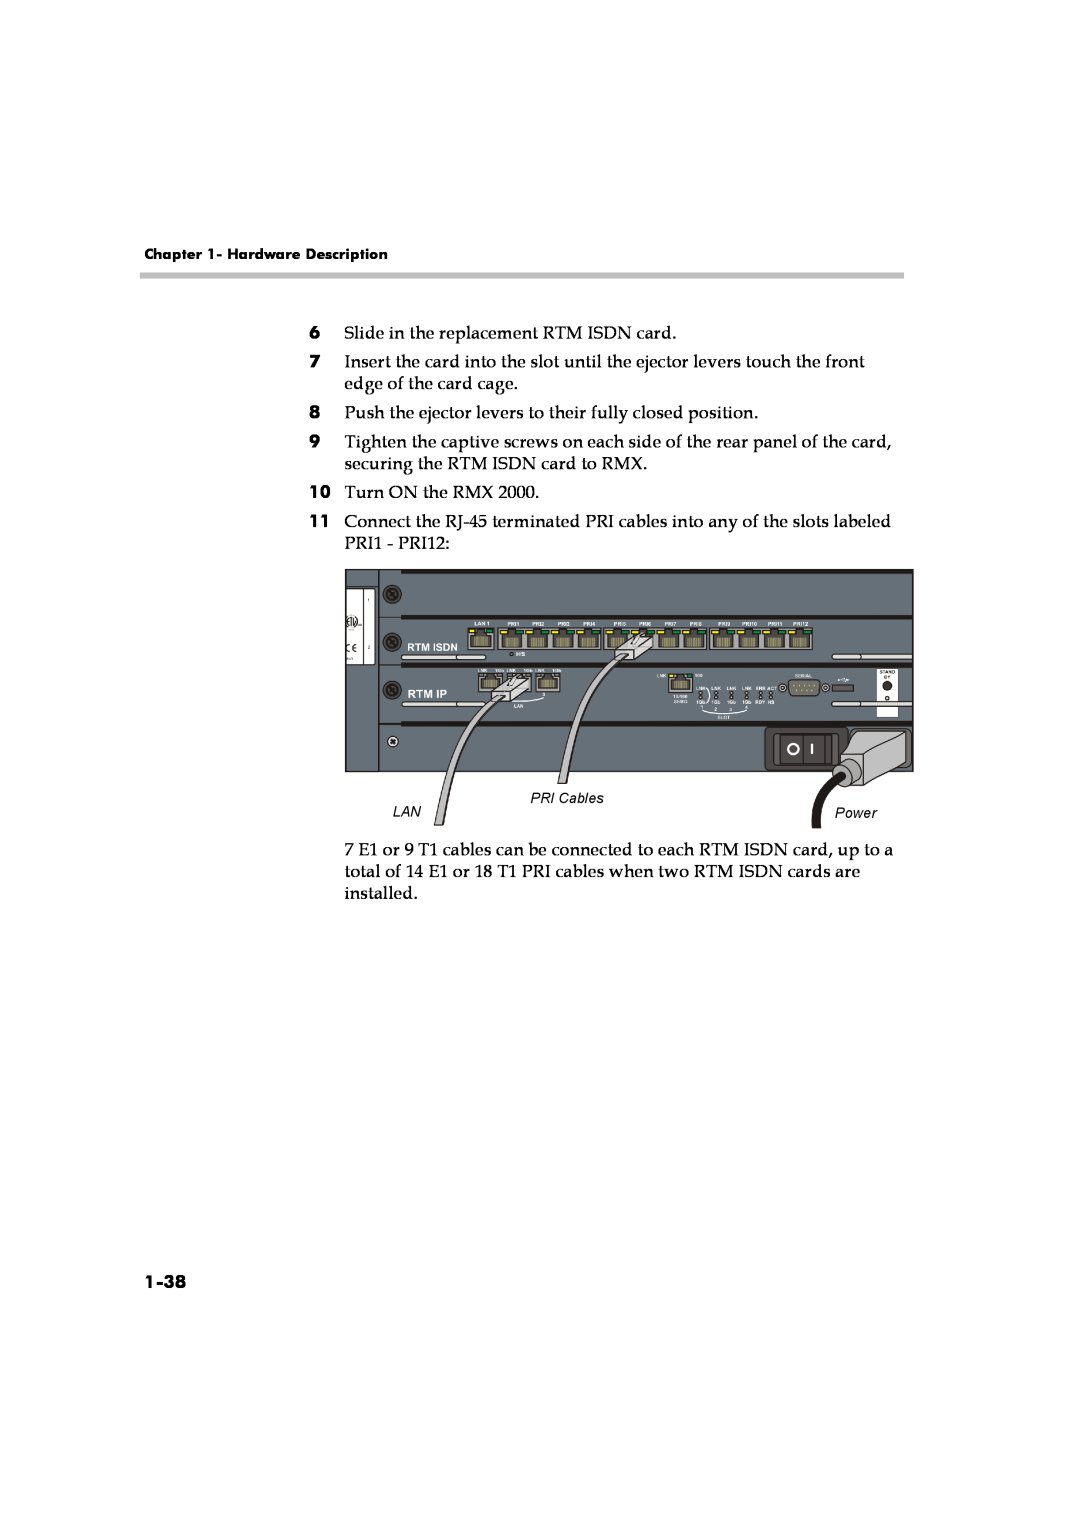 Polycom DOC2558B manual 1-38, Slide in the replacement RTM ISDN card 